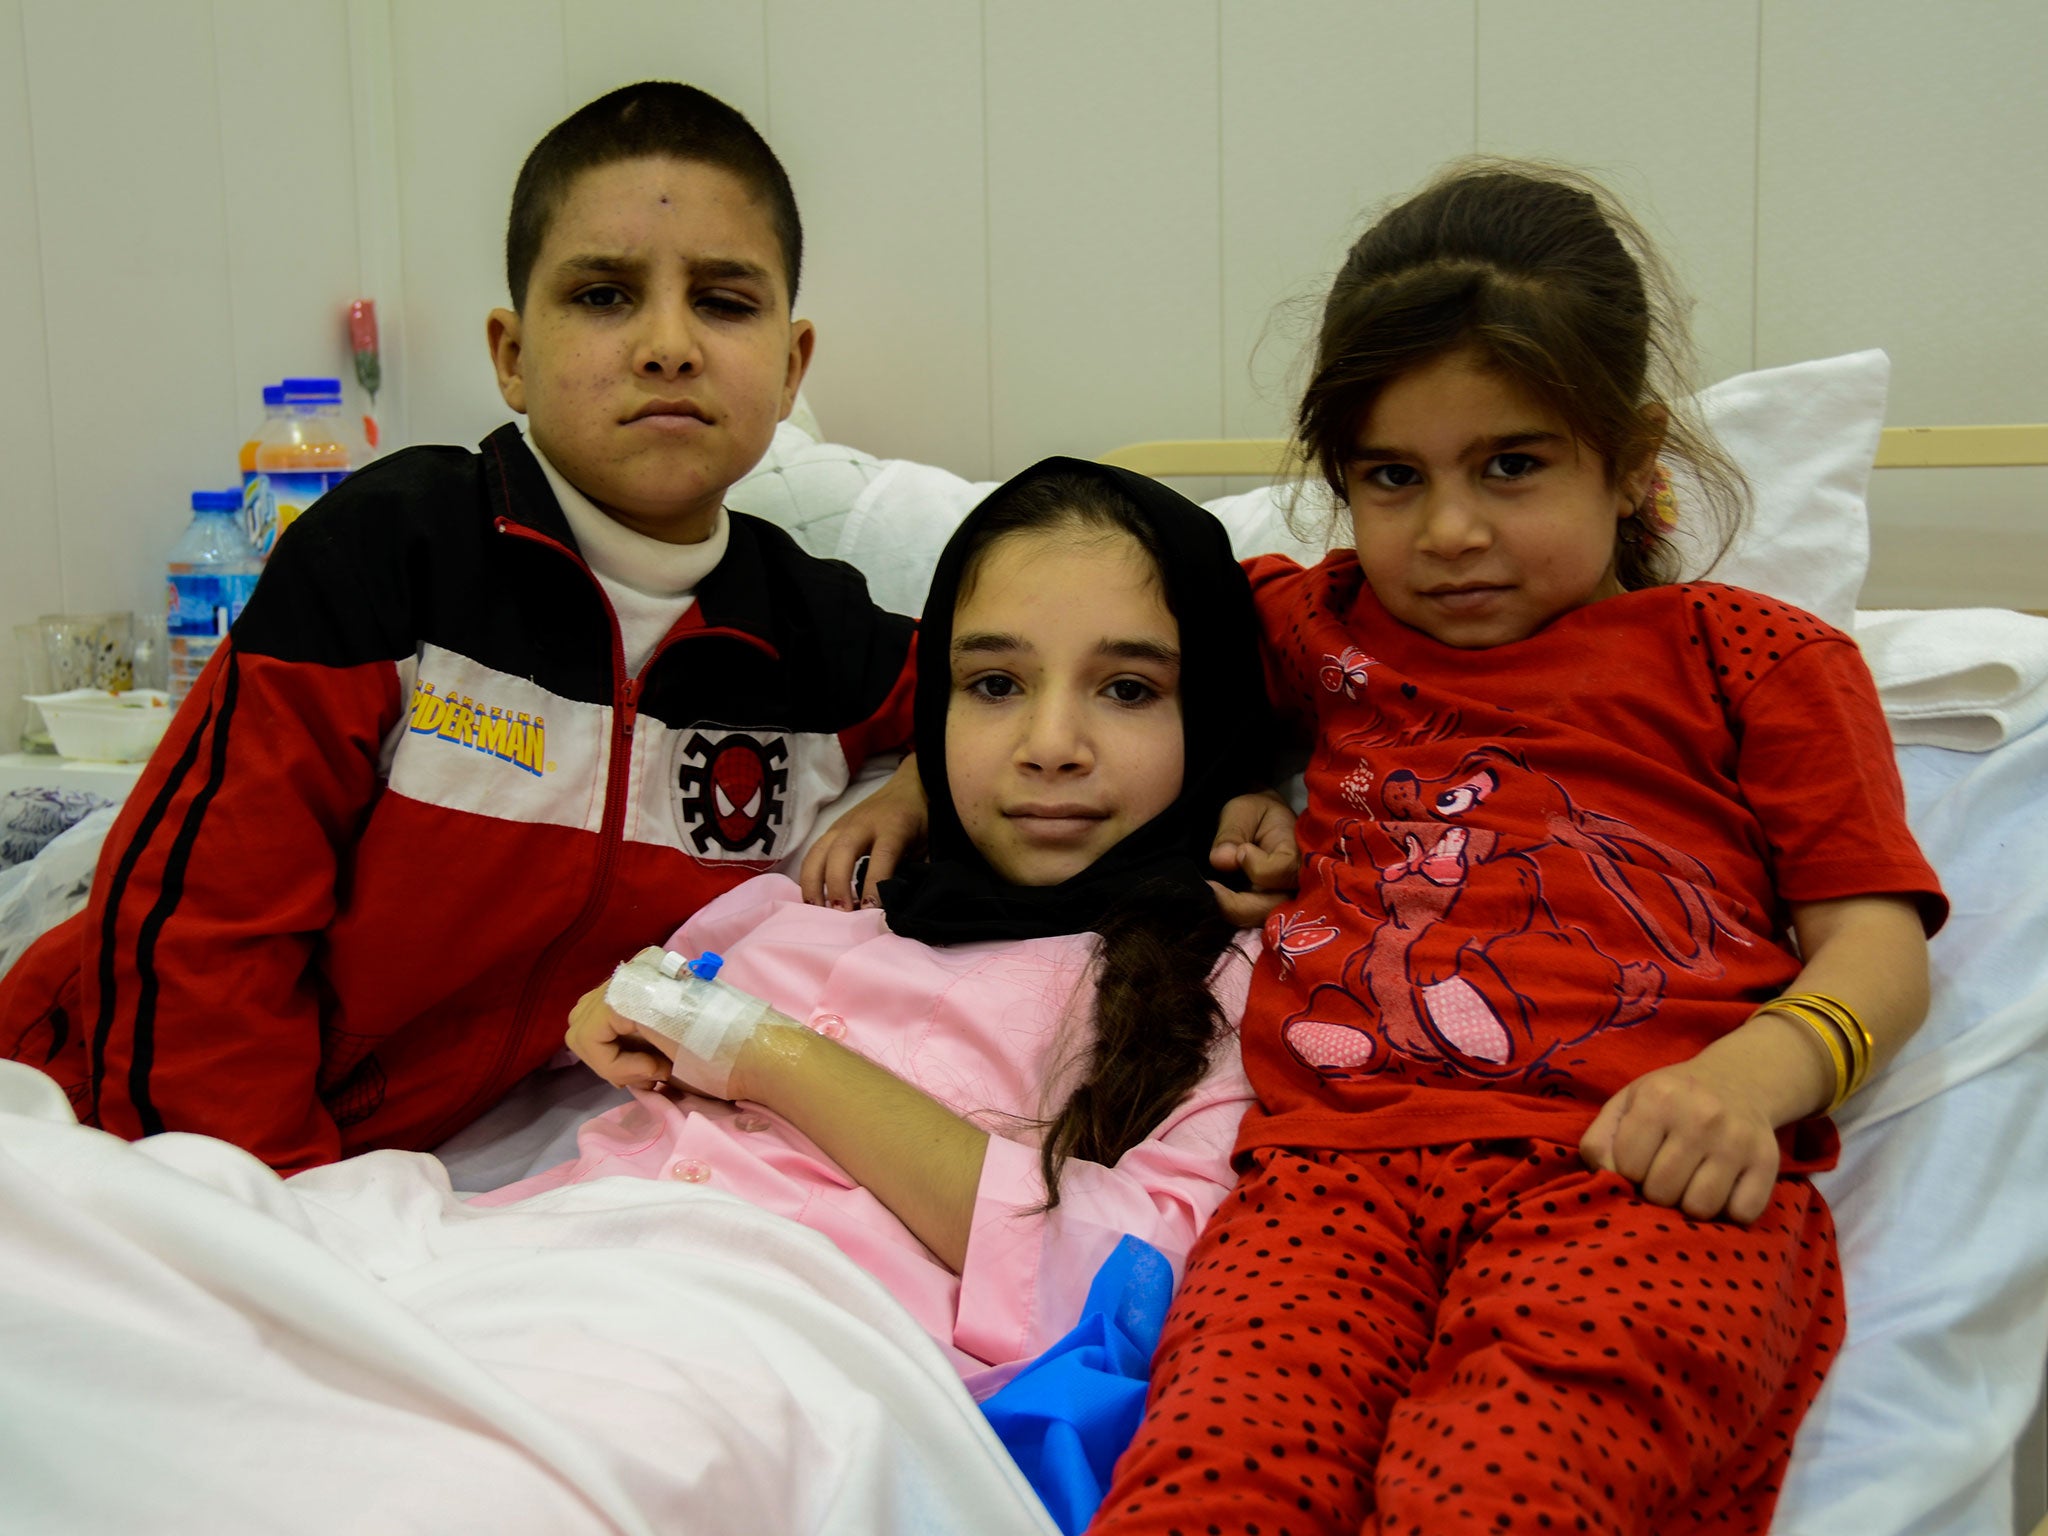 Amina (centre) with her brother and sister after the operation